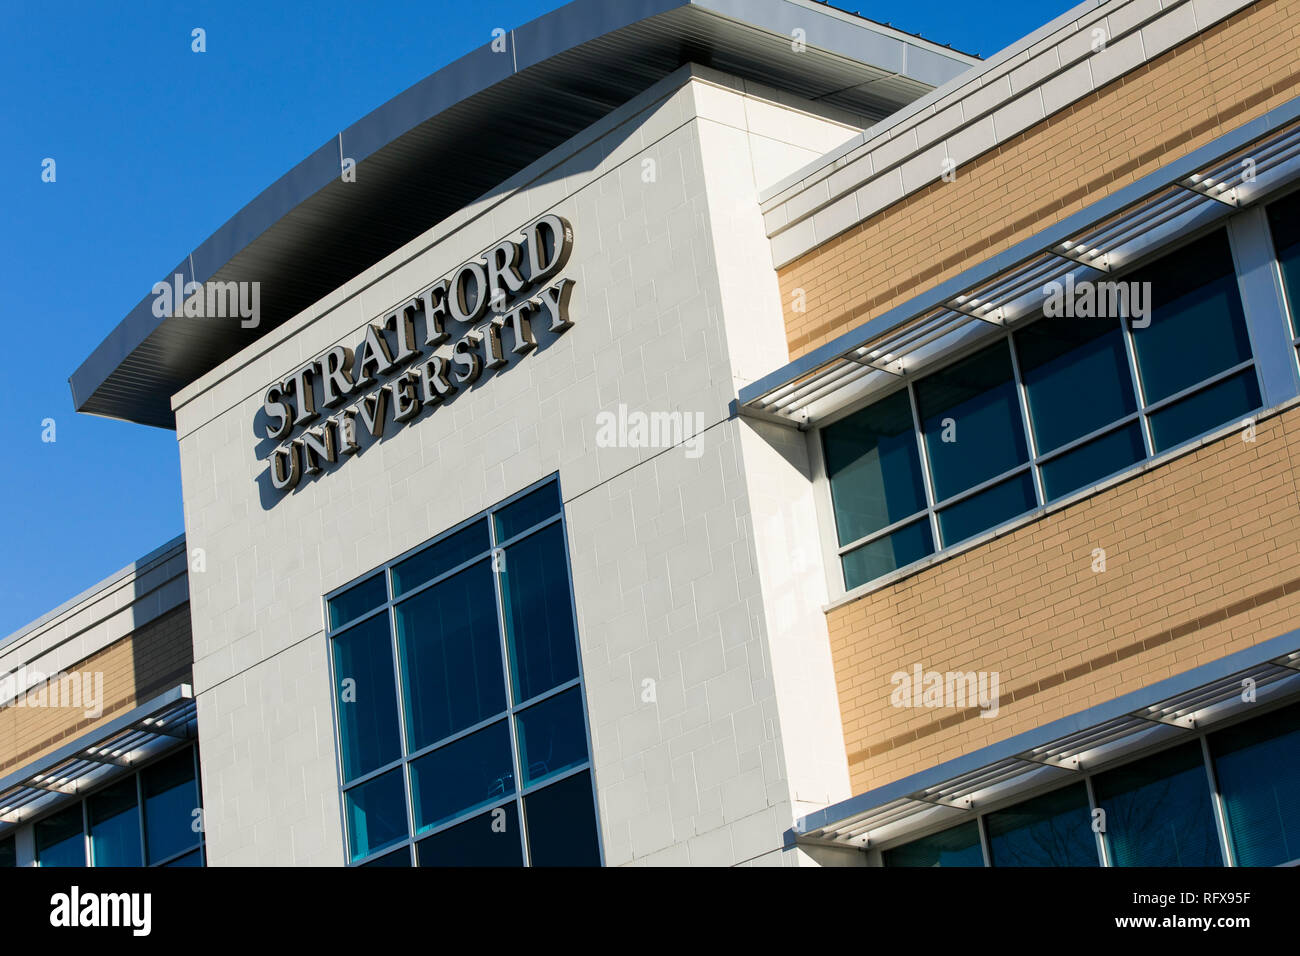 A logo sign outside of a facility occupied by Stratford University in Woodbridge, Virginia, on January 21, 2019. Stock Photo